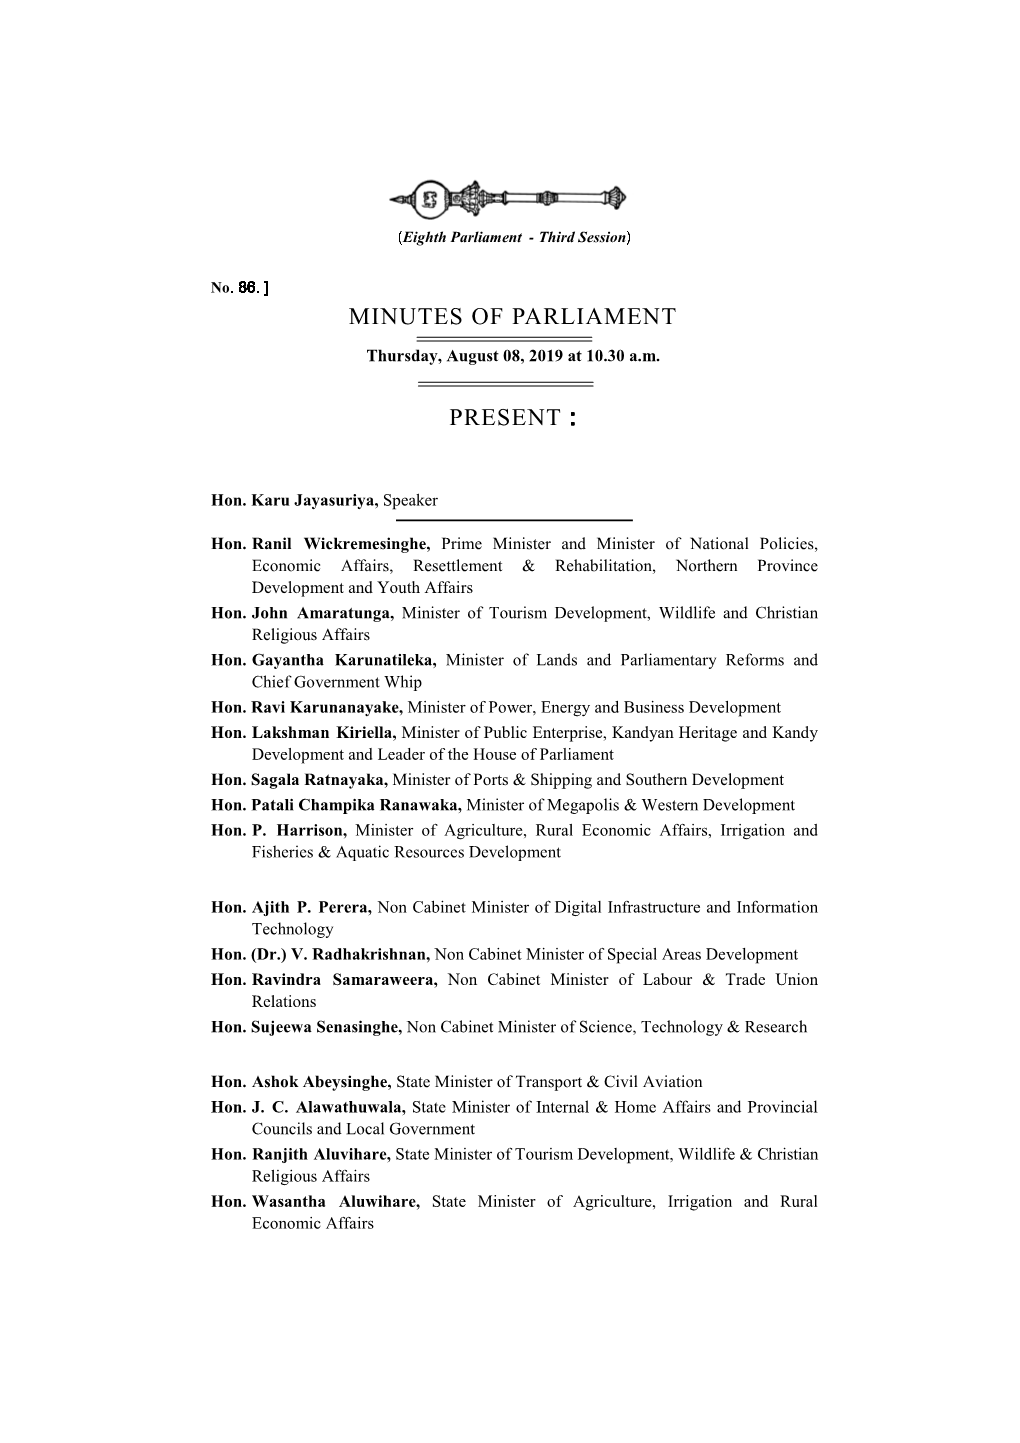 Minutes of Parliament for 08.08.2019